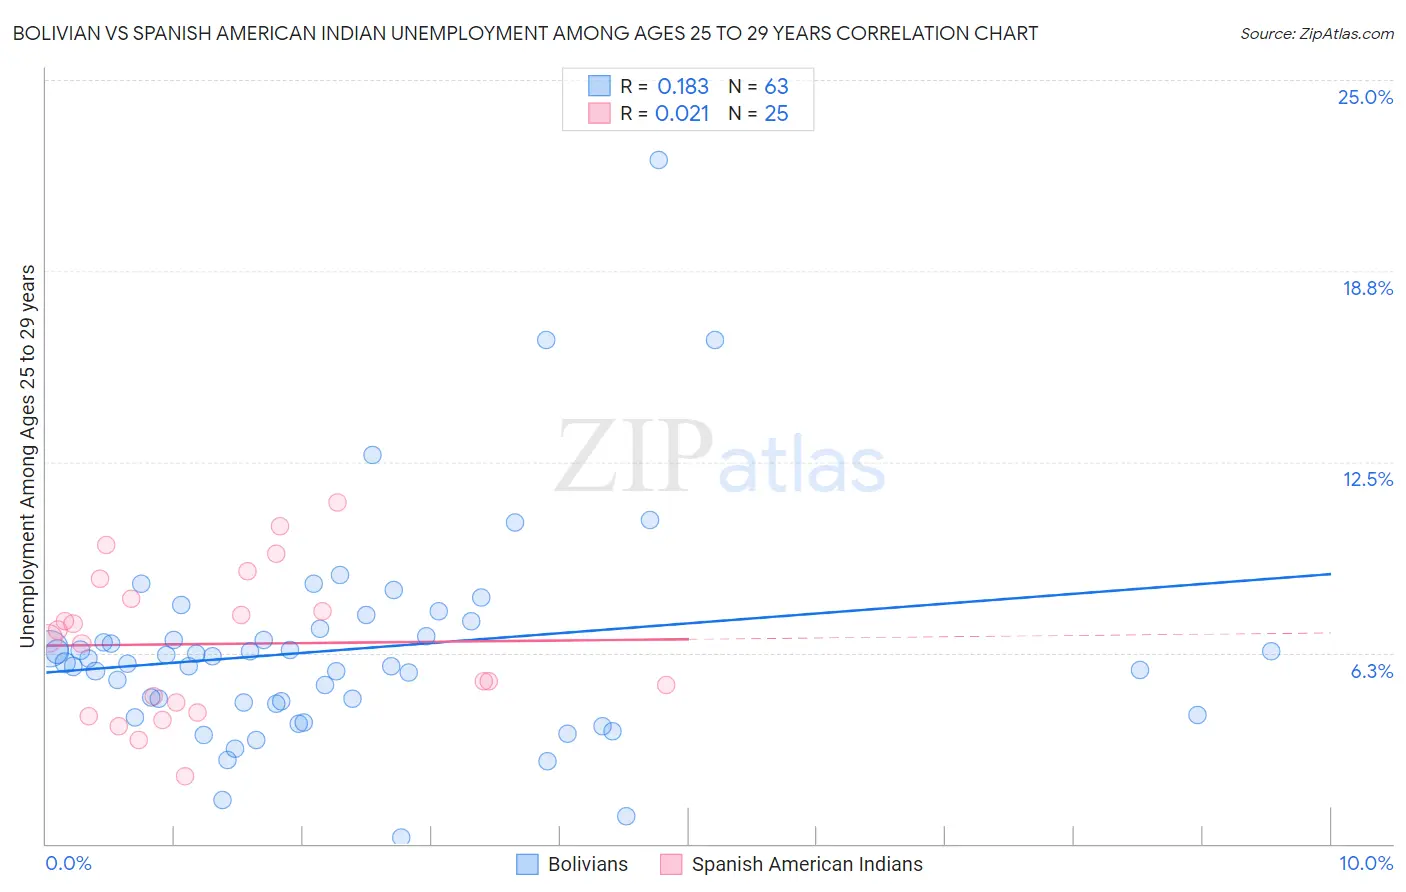 Bolivian vs Spanish American Indian Unemployment Among Ages 25 to 29 years